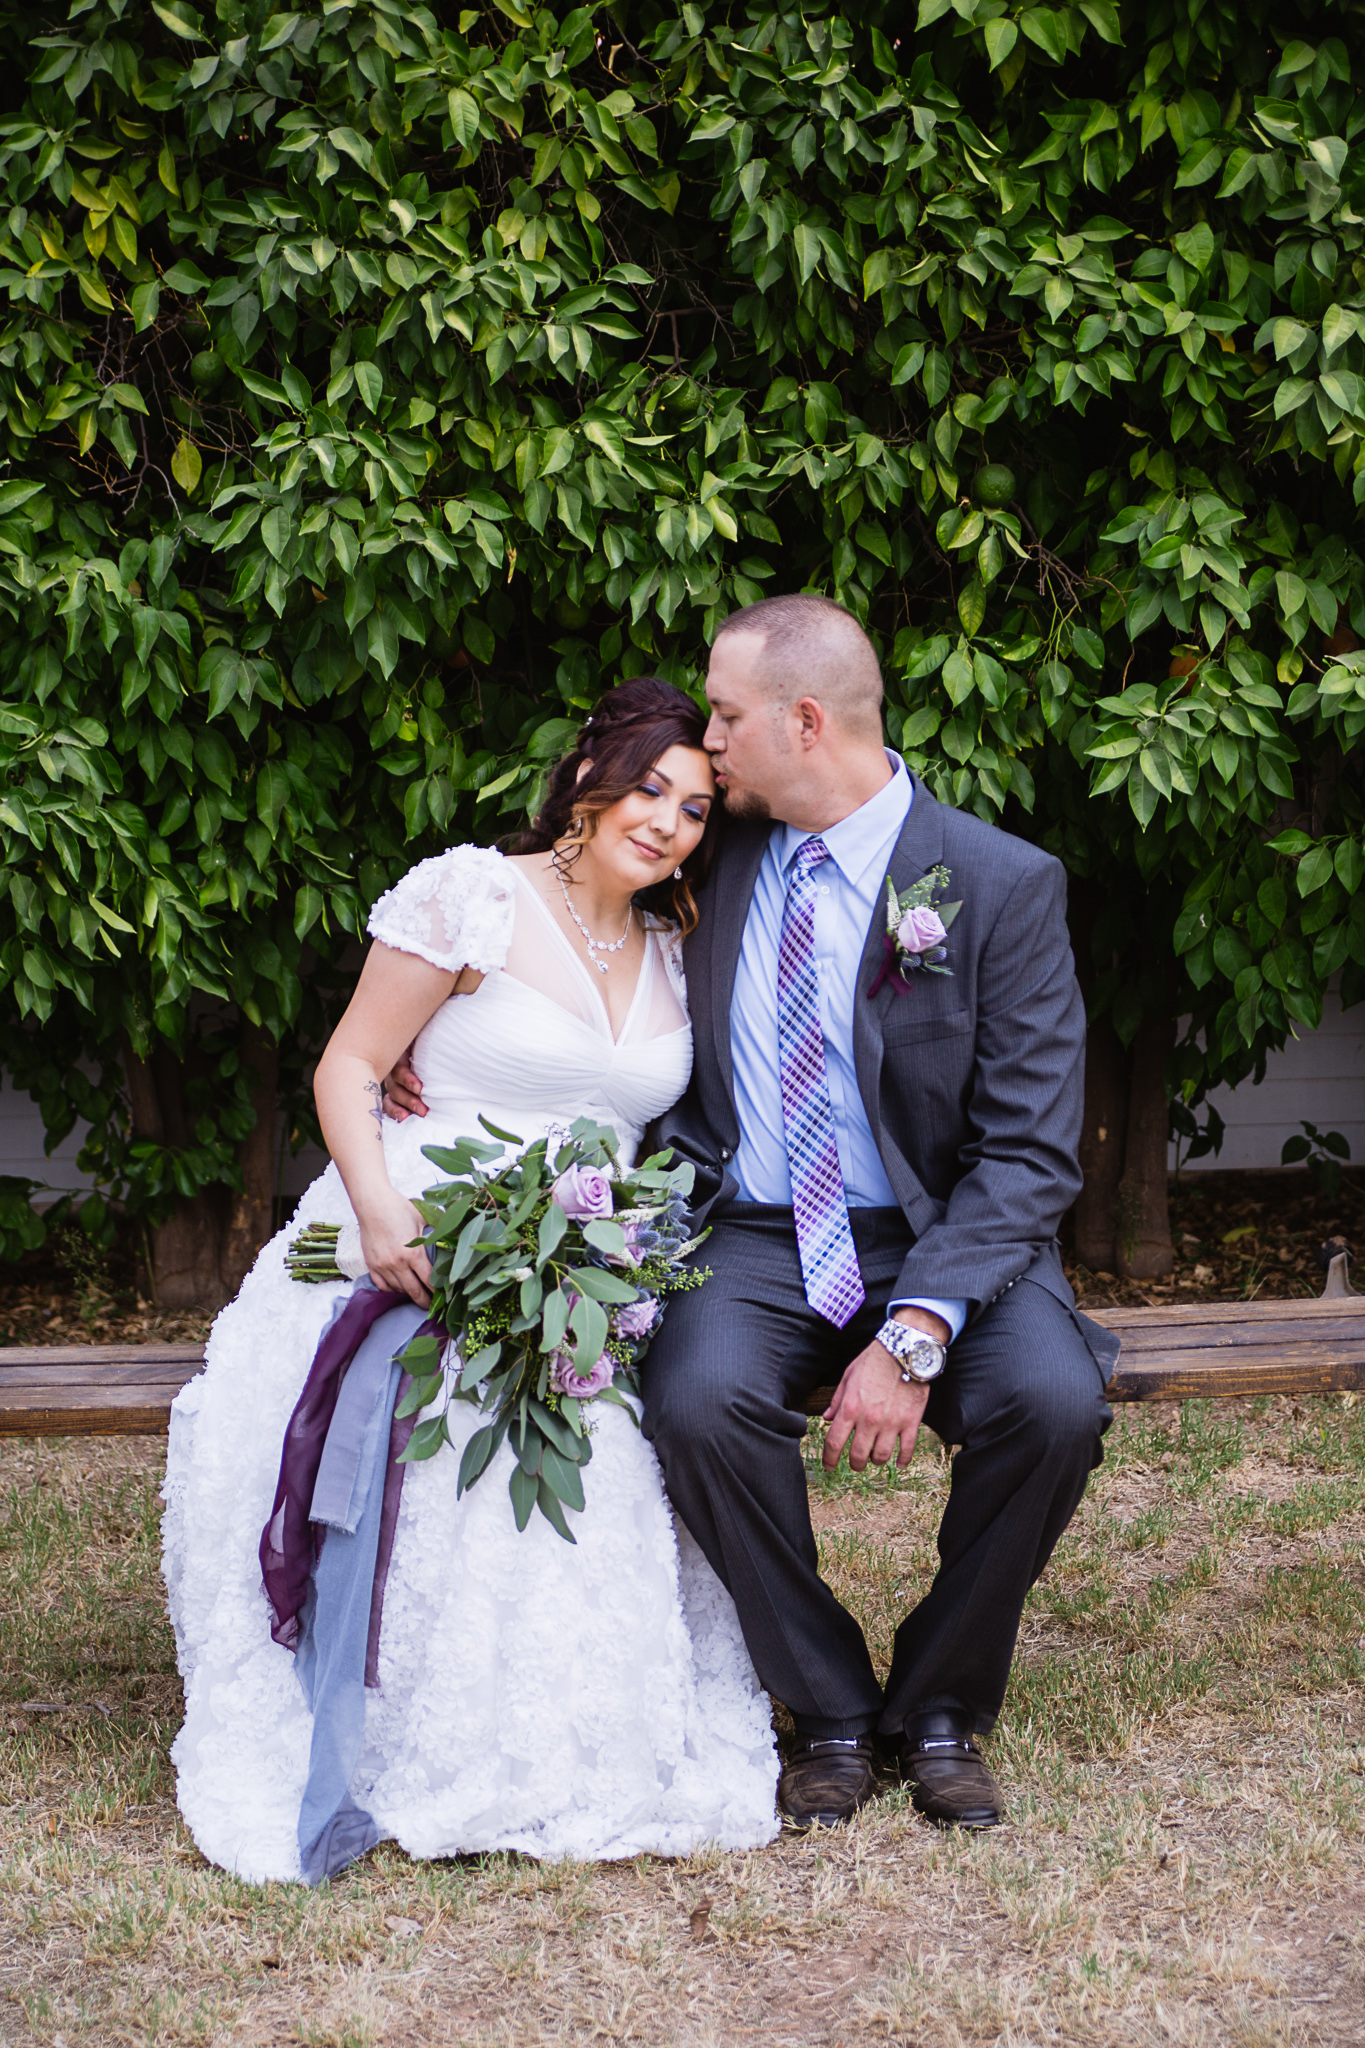 Groom kissing bride on the forehead at their Dusty Blue and Lavender backyard wedding by PMA Photography.